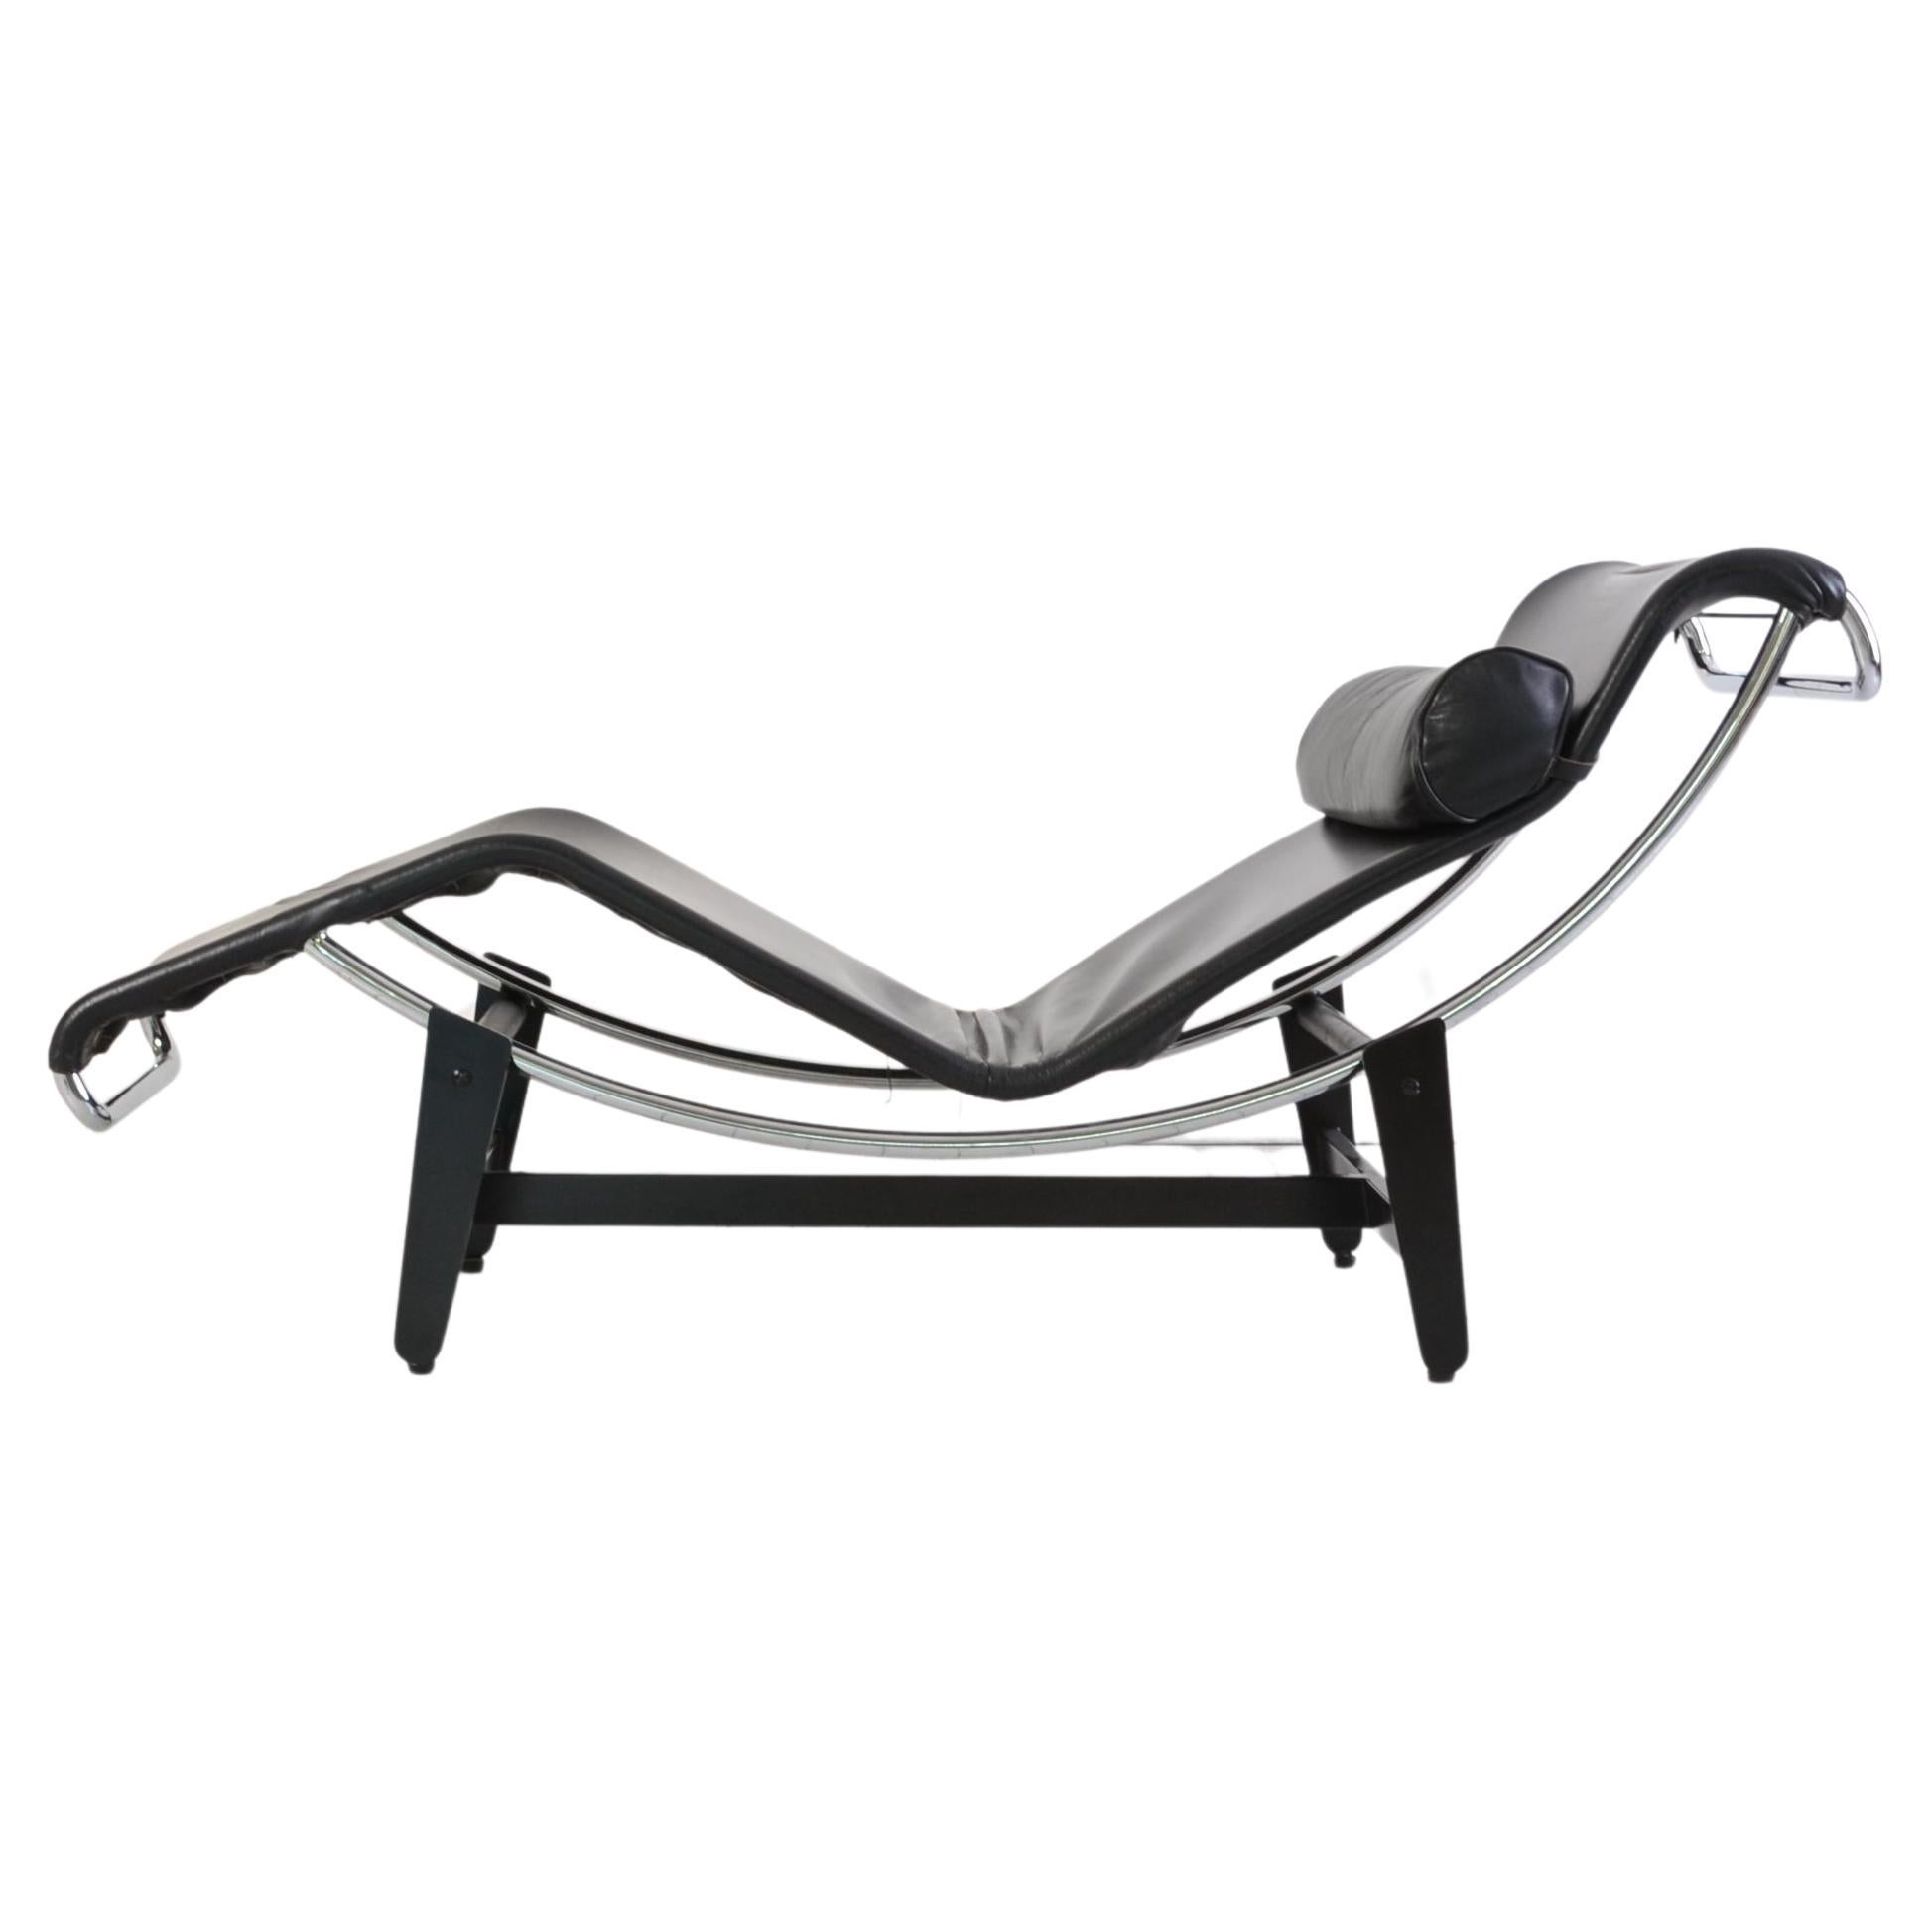 Corbusier B306 for Wohnbedarf 1955, Chaise Lounge For Sale at 1stDibs